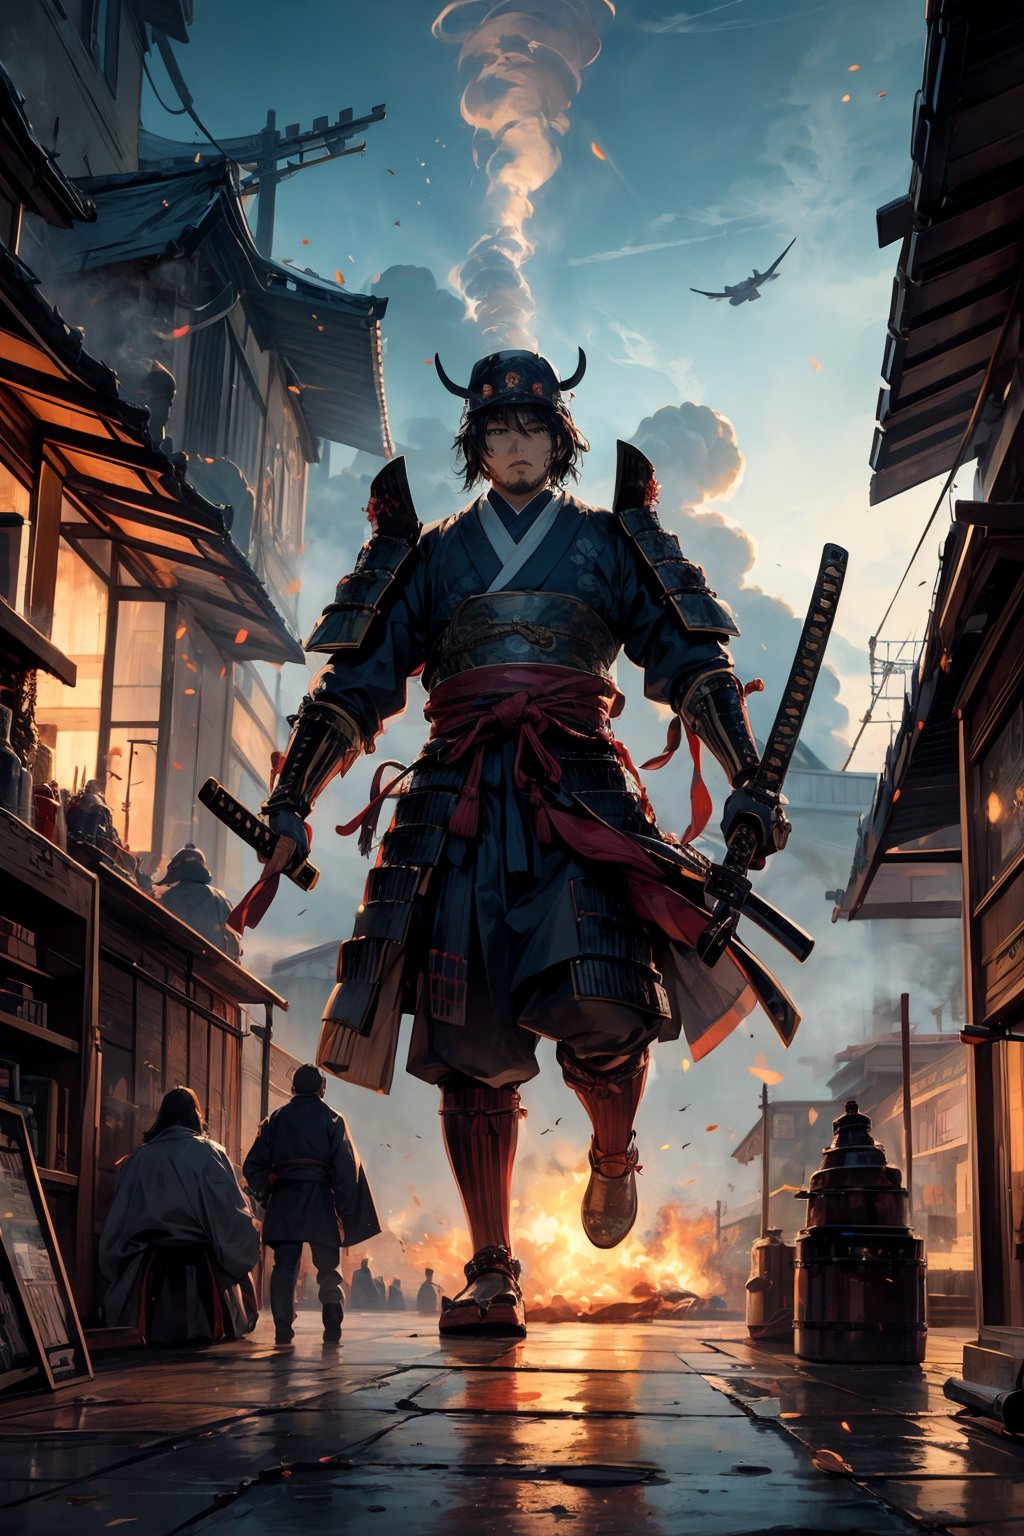 Imagine a world where the honor of ancient samurai converges with the technological wonders of steampunk brilliance. In this evocative realm, amidst towering pagodas adorned with brass fittings and bustling marketplaces filled with the hiss of steam, emerges a formidable figure: a samurai. Envision him clad in a blend of traditional armor and steampunk accouterments, with ornate kabuto helmets featuring intricate gears and steam vents. His katana, sheathed in a holster adorned with mechanical embellishments, gleams with the promise of swift justice. With a stoic expression etched upon his face, he embodies the code of bushido, his every movement a testament to discipline and mastery. Behind him, the cityscape sprawls with towering factories belching steam into the sky, symbolizing the harmonious coexistence of tradition and progress in this captivating world.